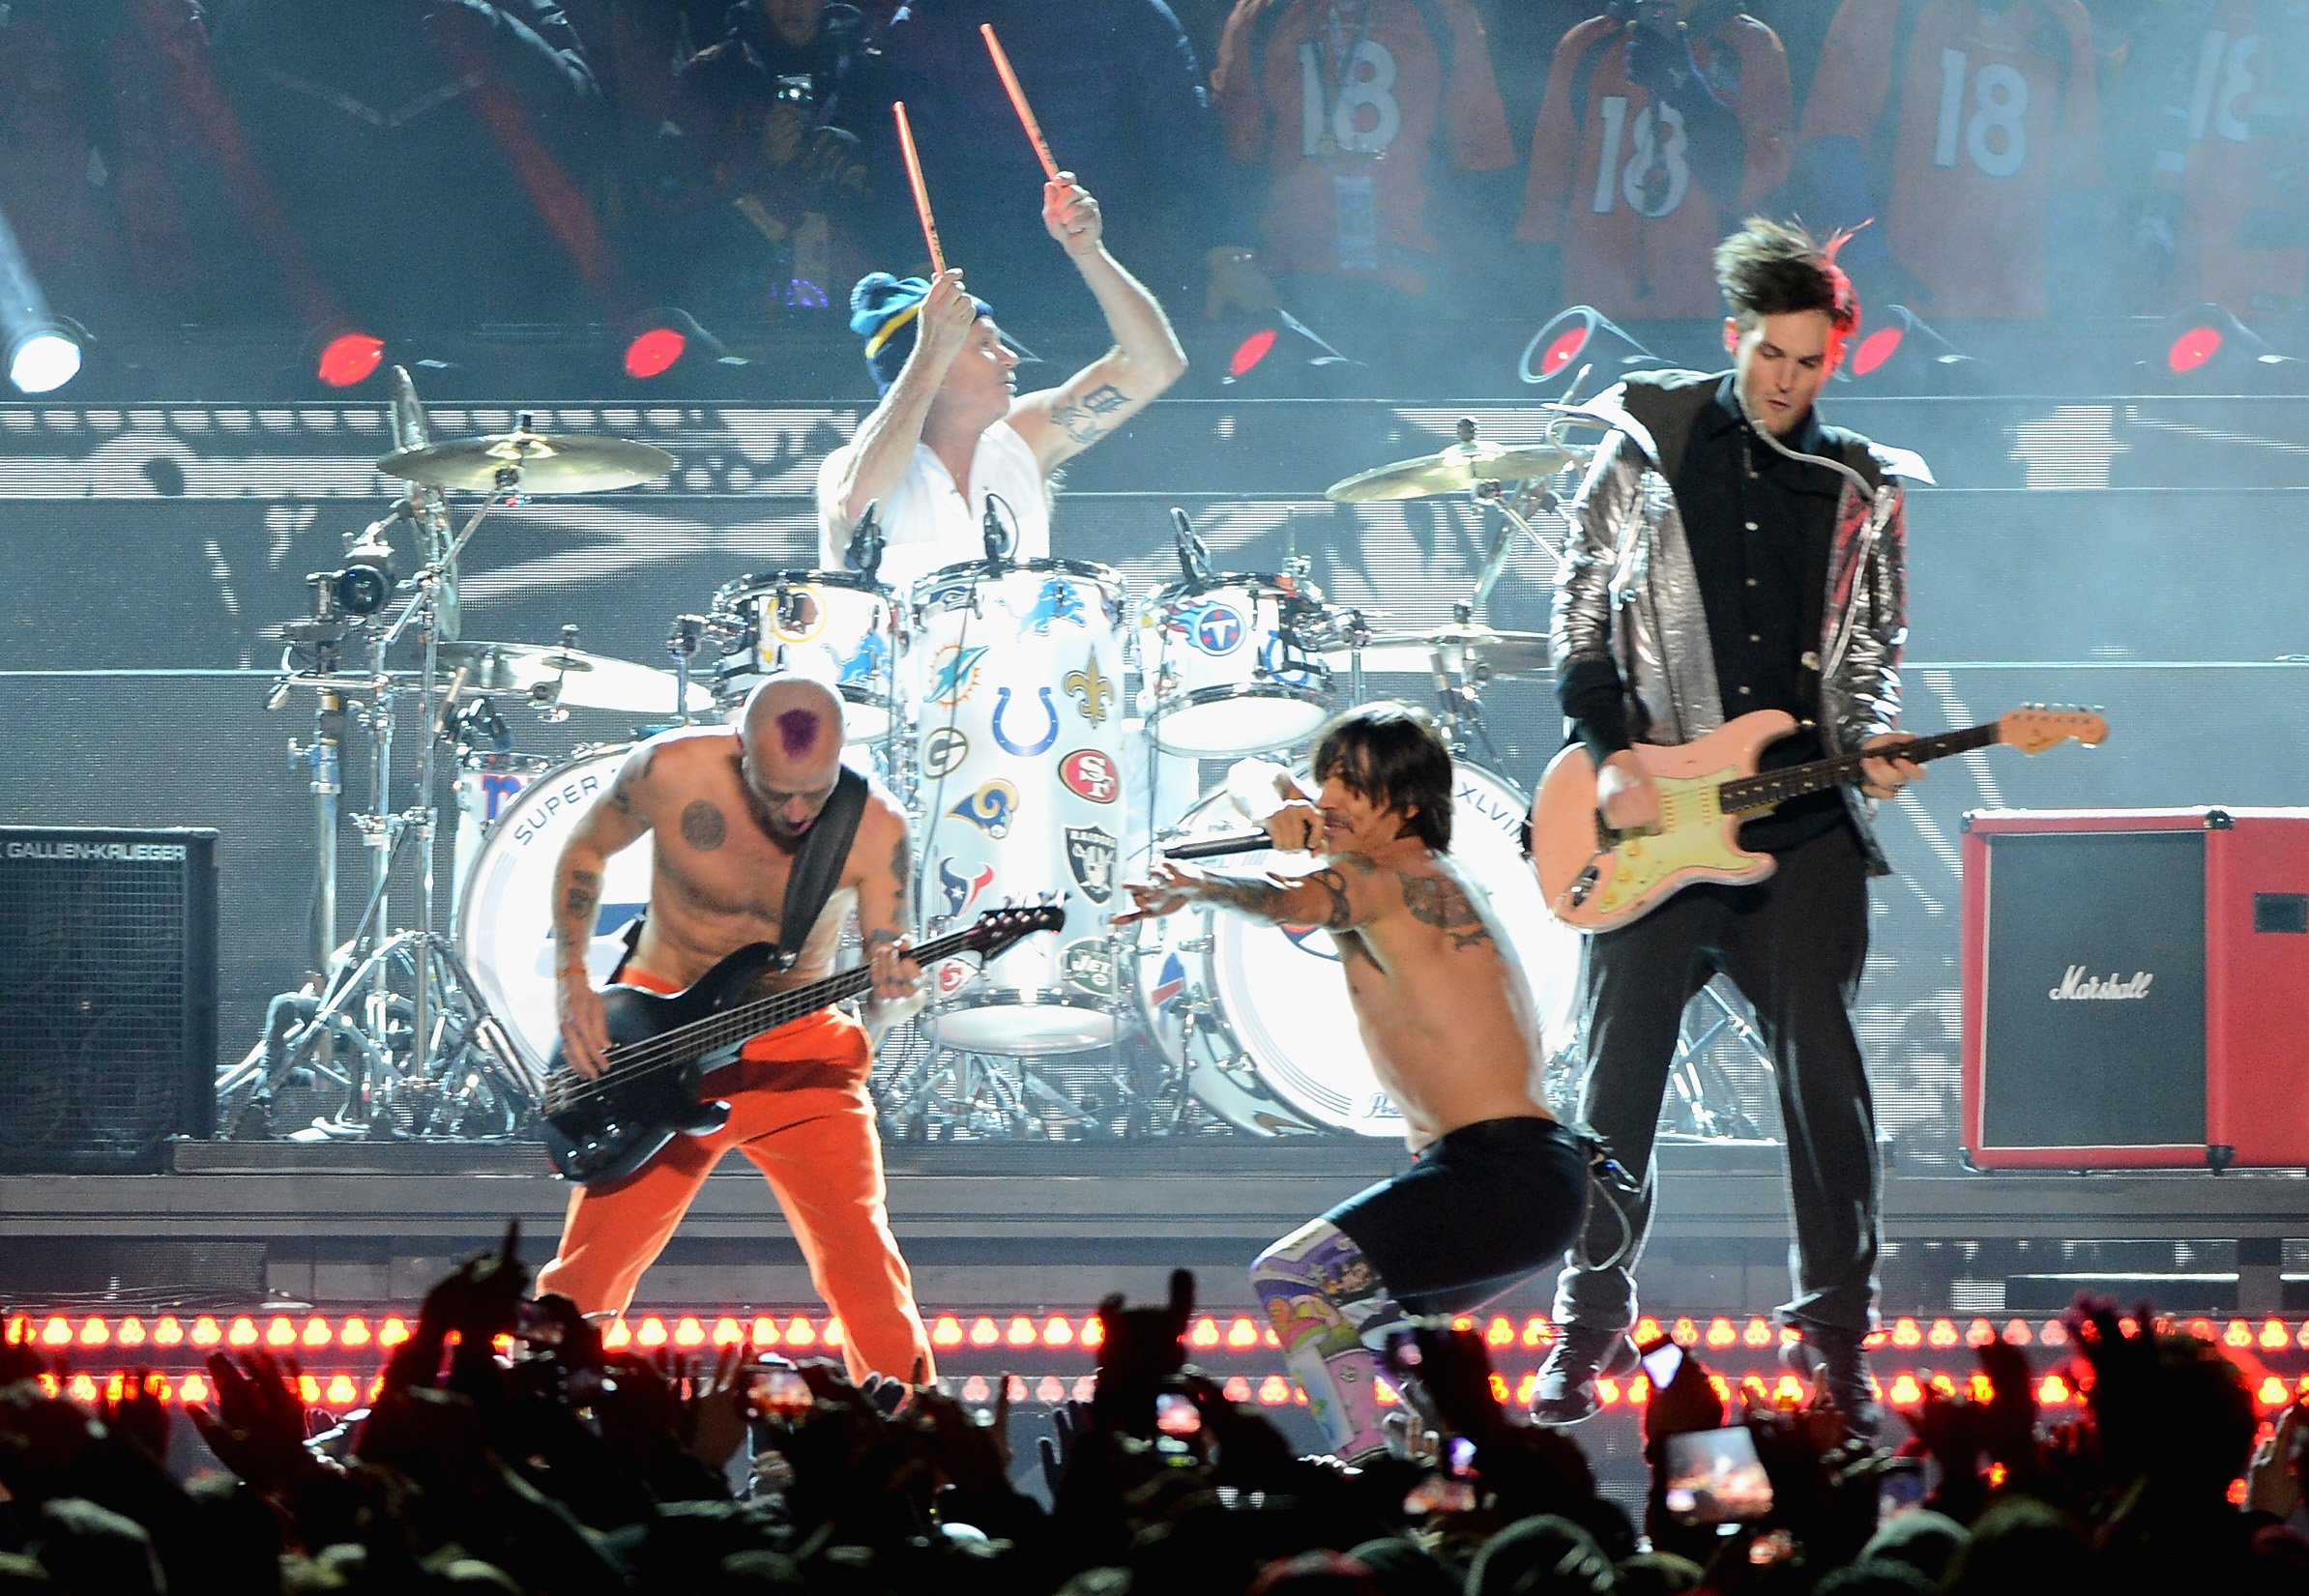 EAST RUTHERFORD, NJ - FEBRUARY 02: Flea, Chad Smith, Anthony Kiedis and Josh Klinghoffer of the Red Hot Chili Peppers perform during the Pepsi Super Bowl XLVIII Halftime Show at MetLife Stadium on February 2, 2014 in East Rutherford, New Jersey. (Photo by Theo Wargo/FilmMagic) Getty Images